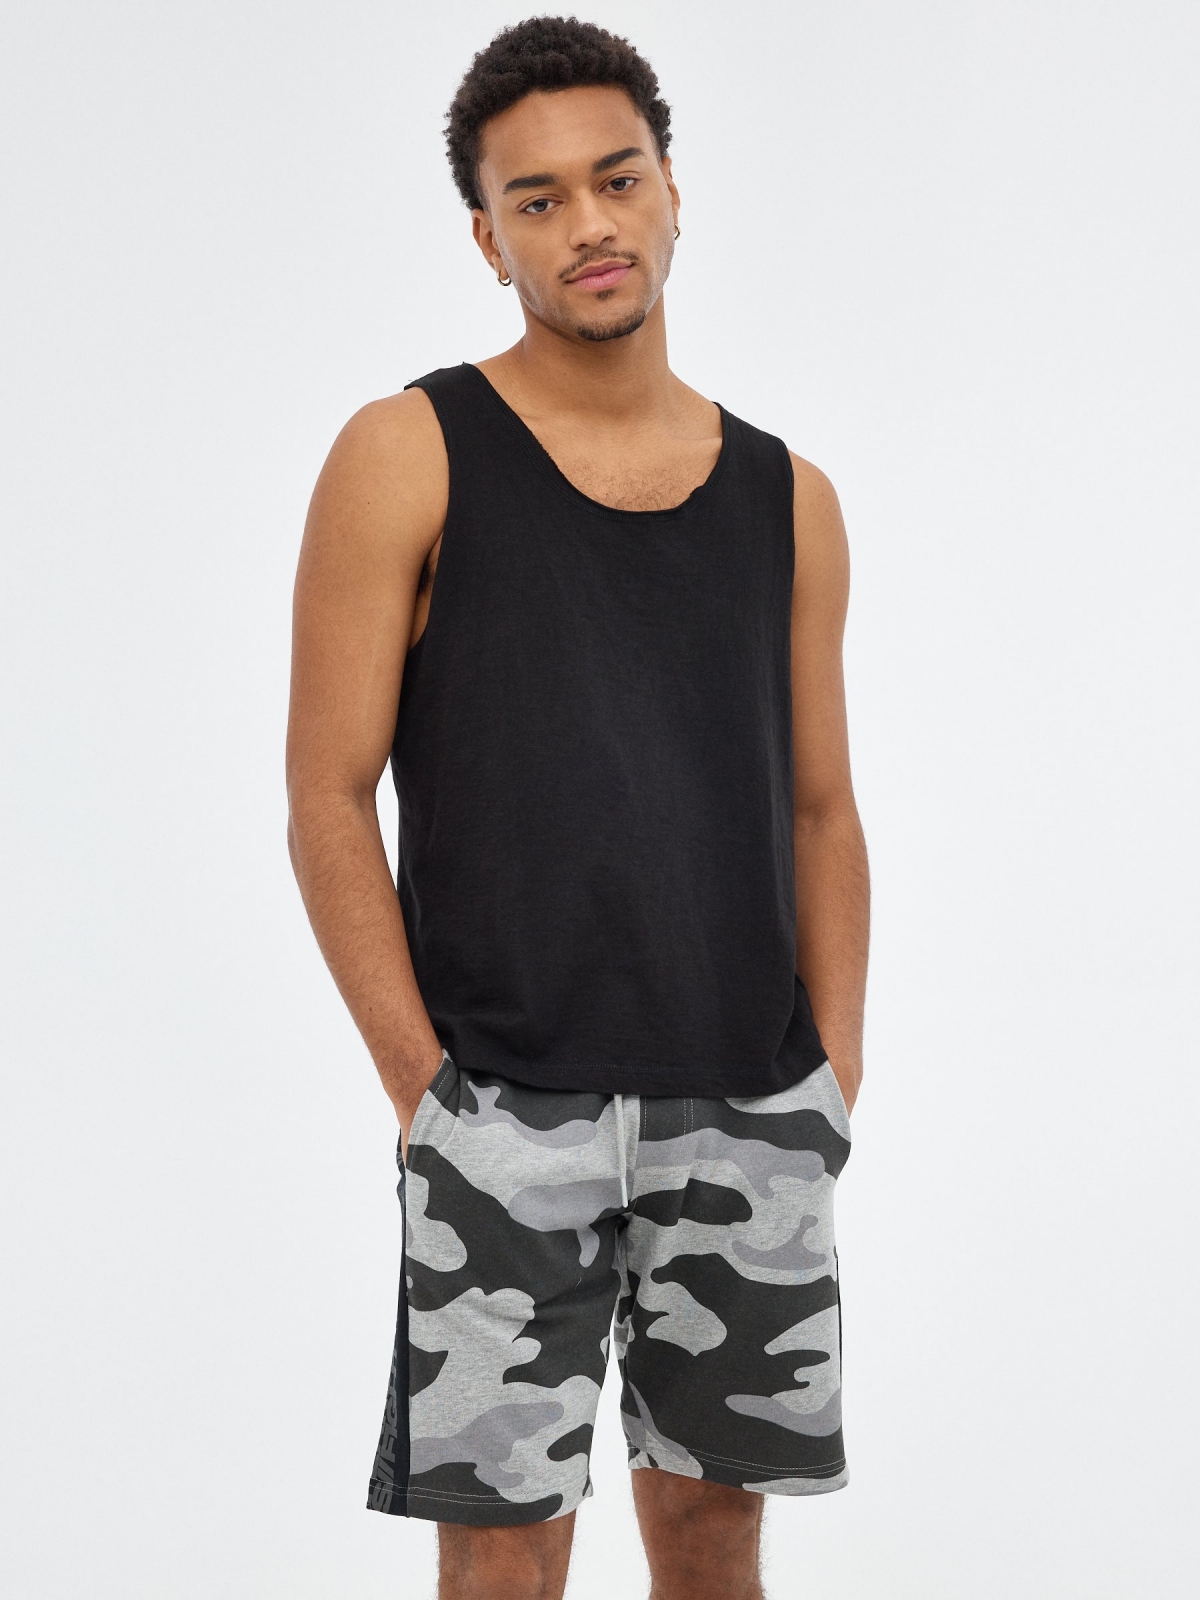 Camouflage jogger Bermuda shorts grey middle front view